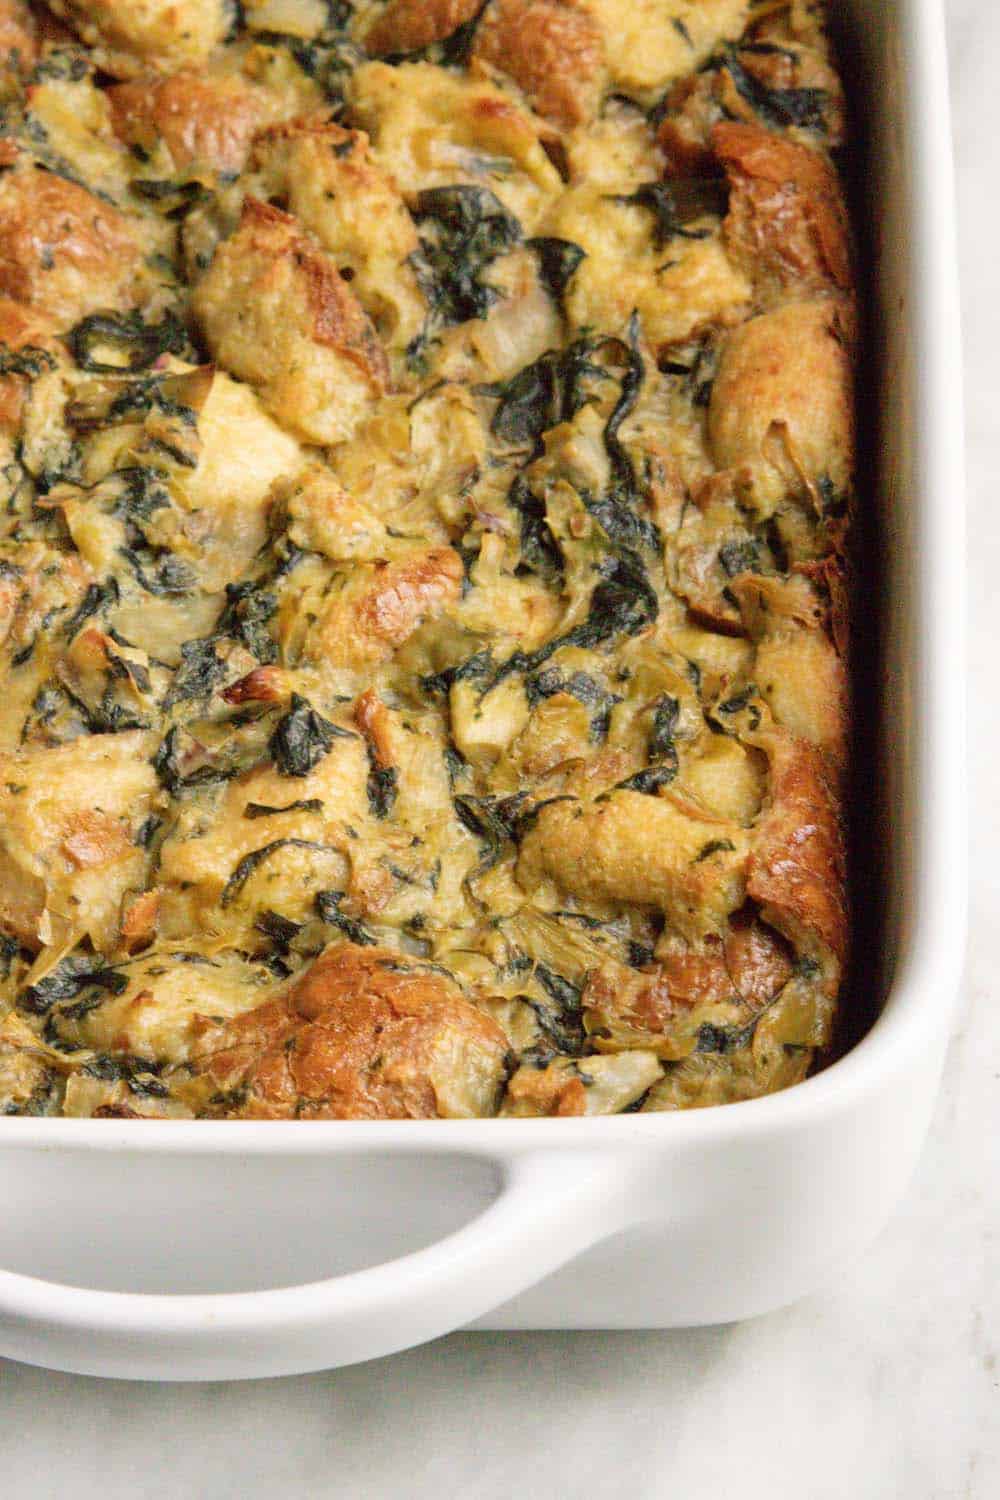 Baked Spinach Artichoke Bread Pudding